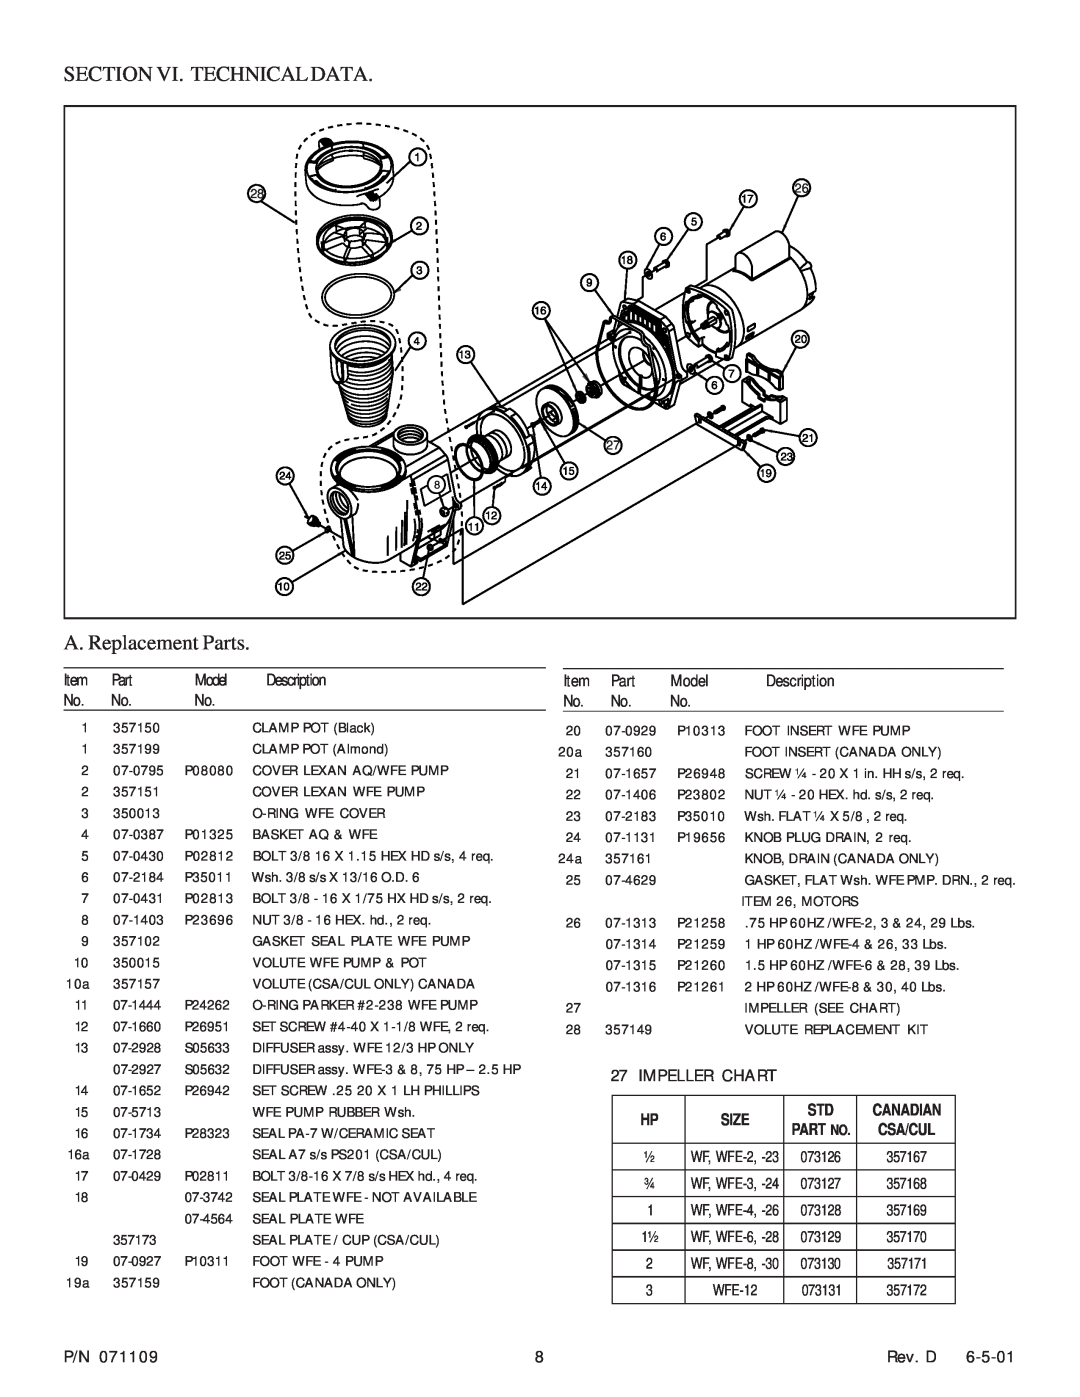 Pentair Pump important safety instructions Section Vi. Technical Data, A. Replacement Parts 